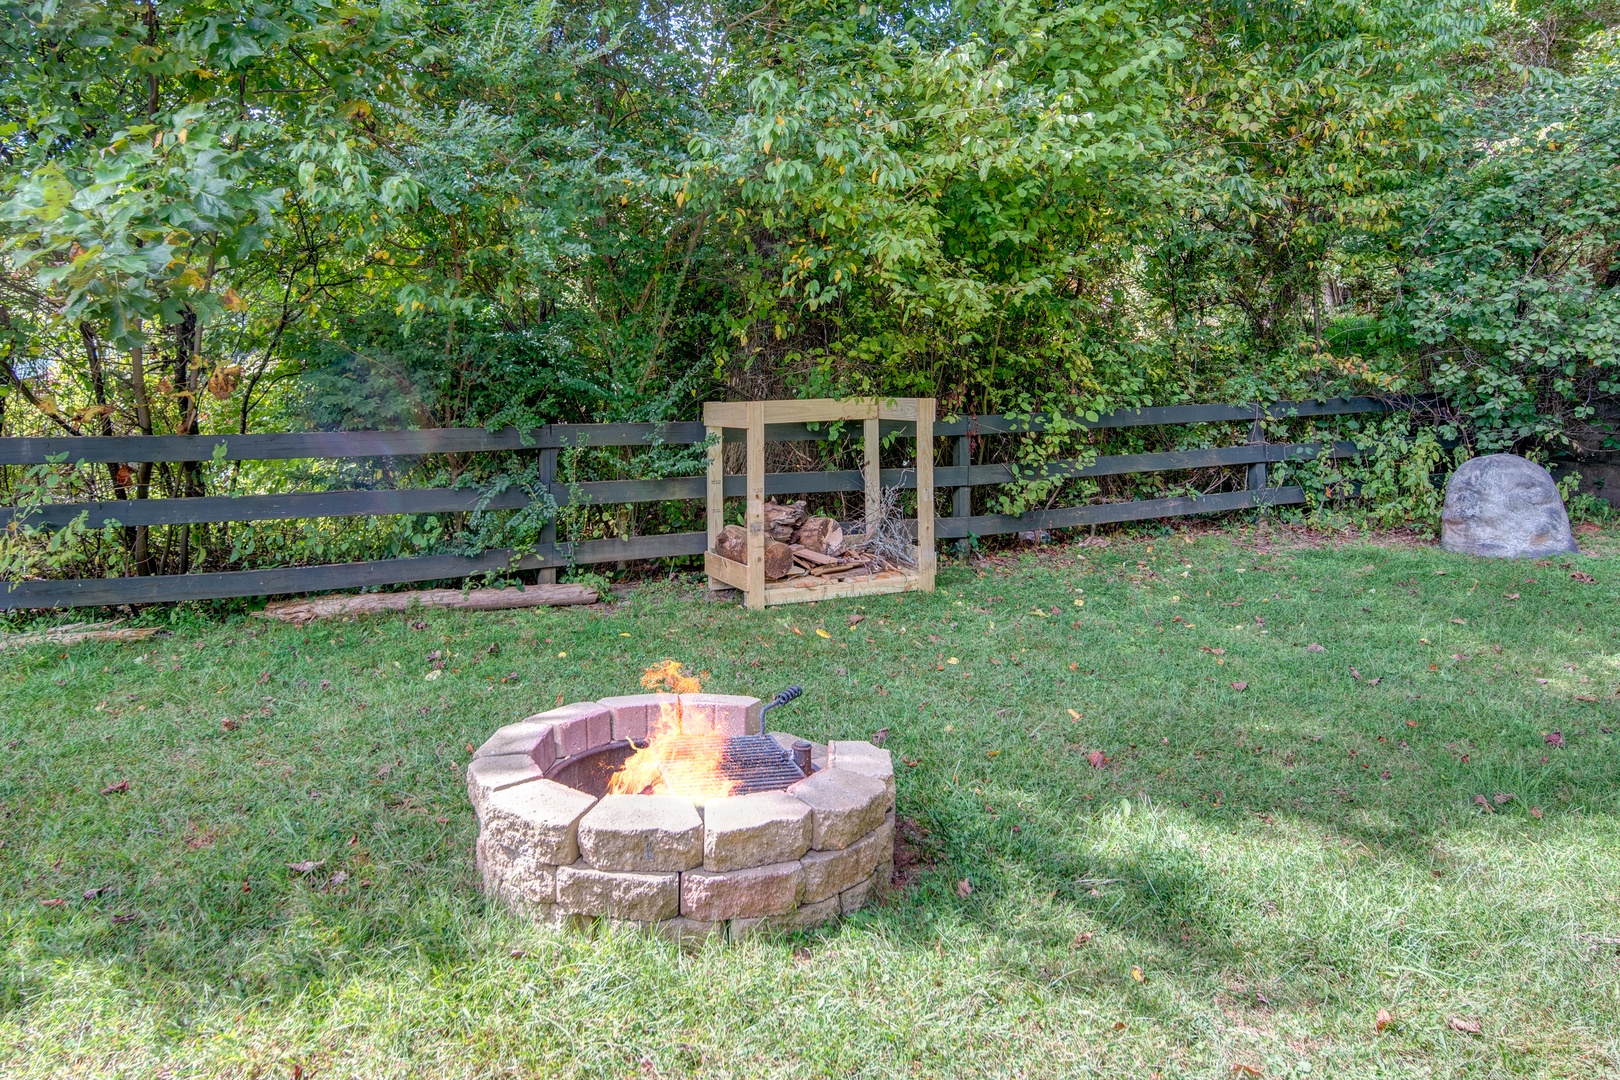 An outdoor firepit awaits for those crisp North Georgia fall nights